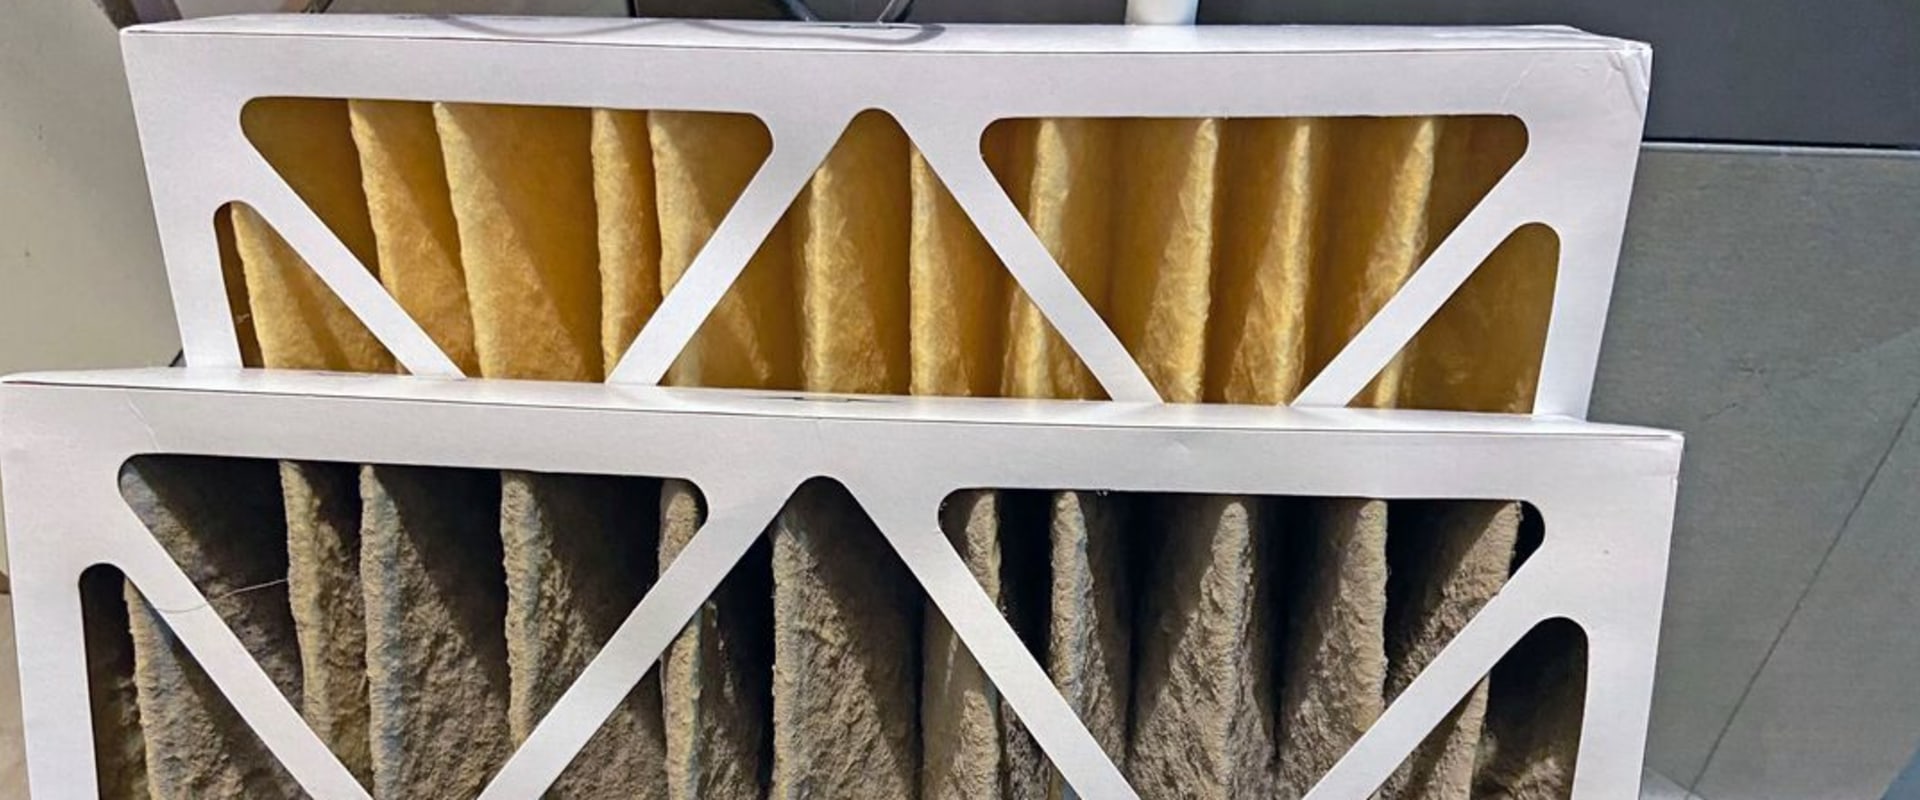 How Often Should You Replace a 4 Inch Furnace Filter?